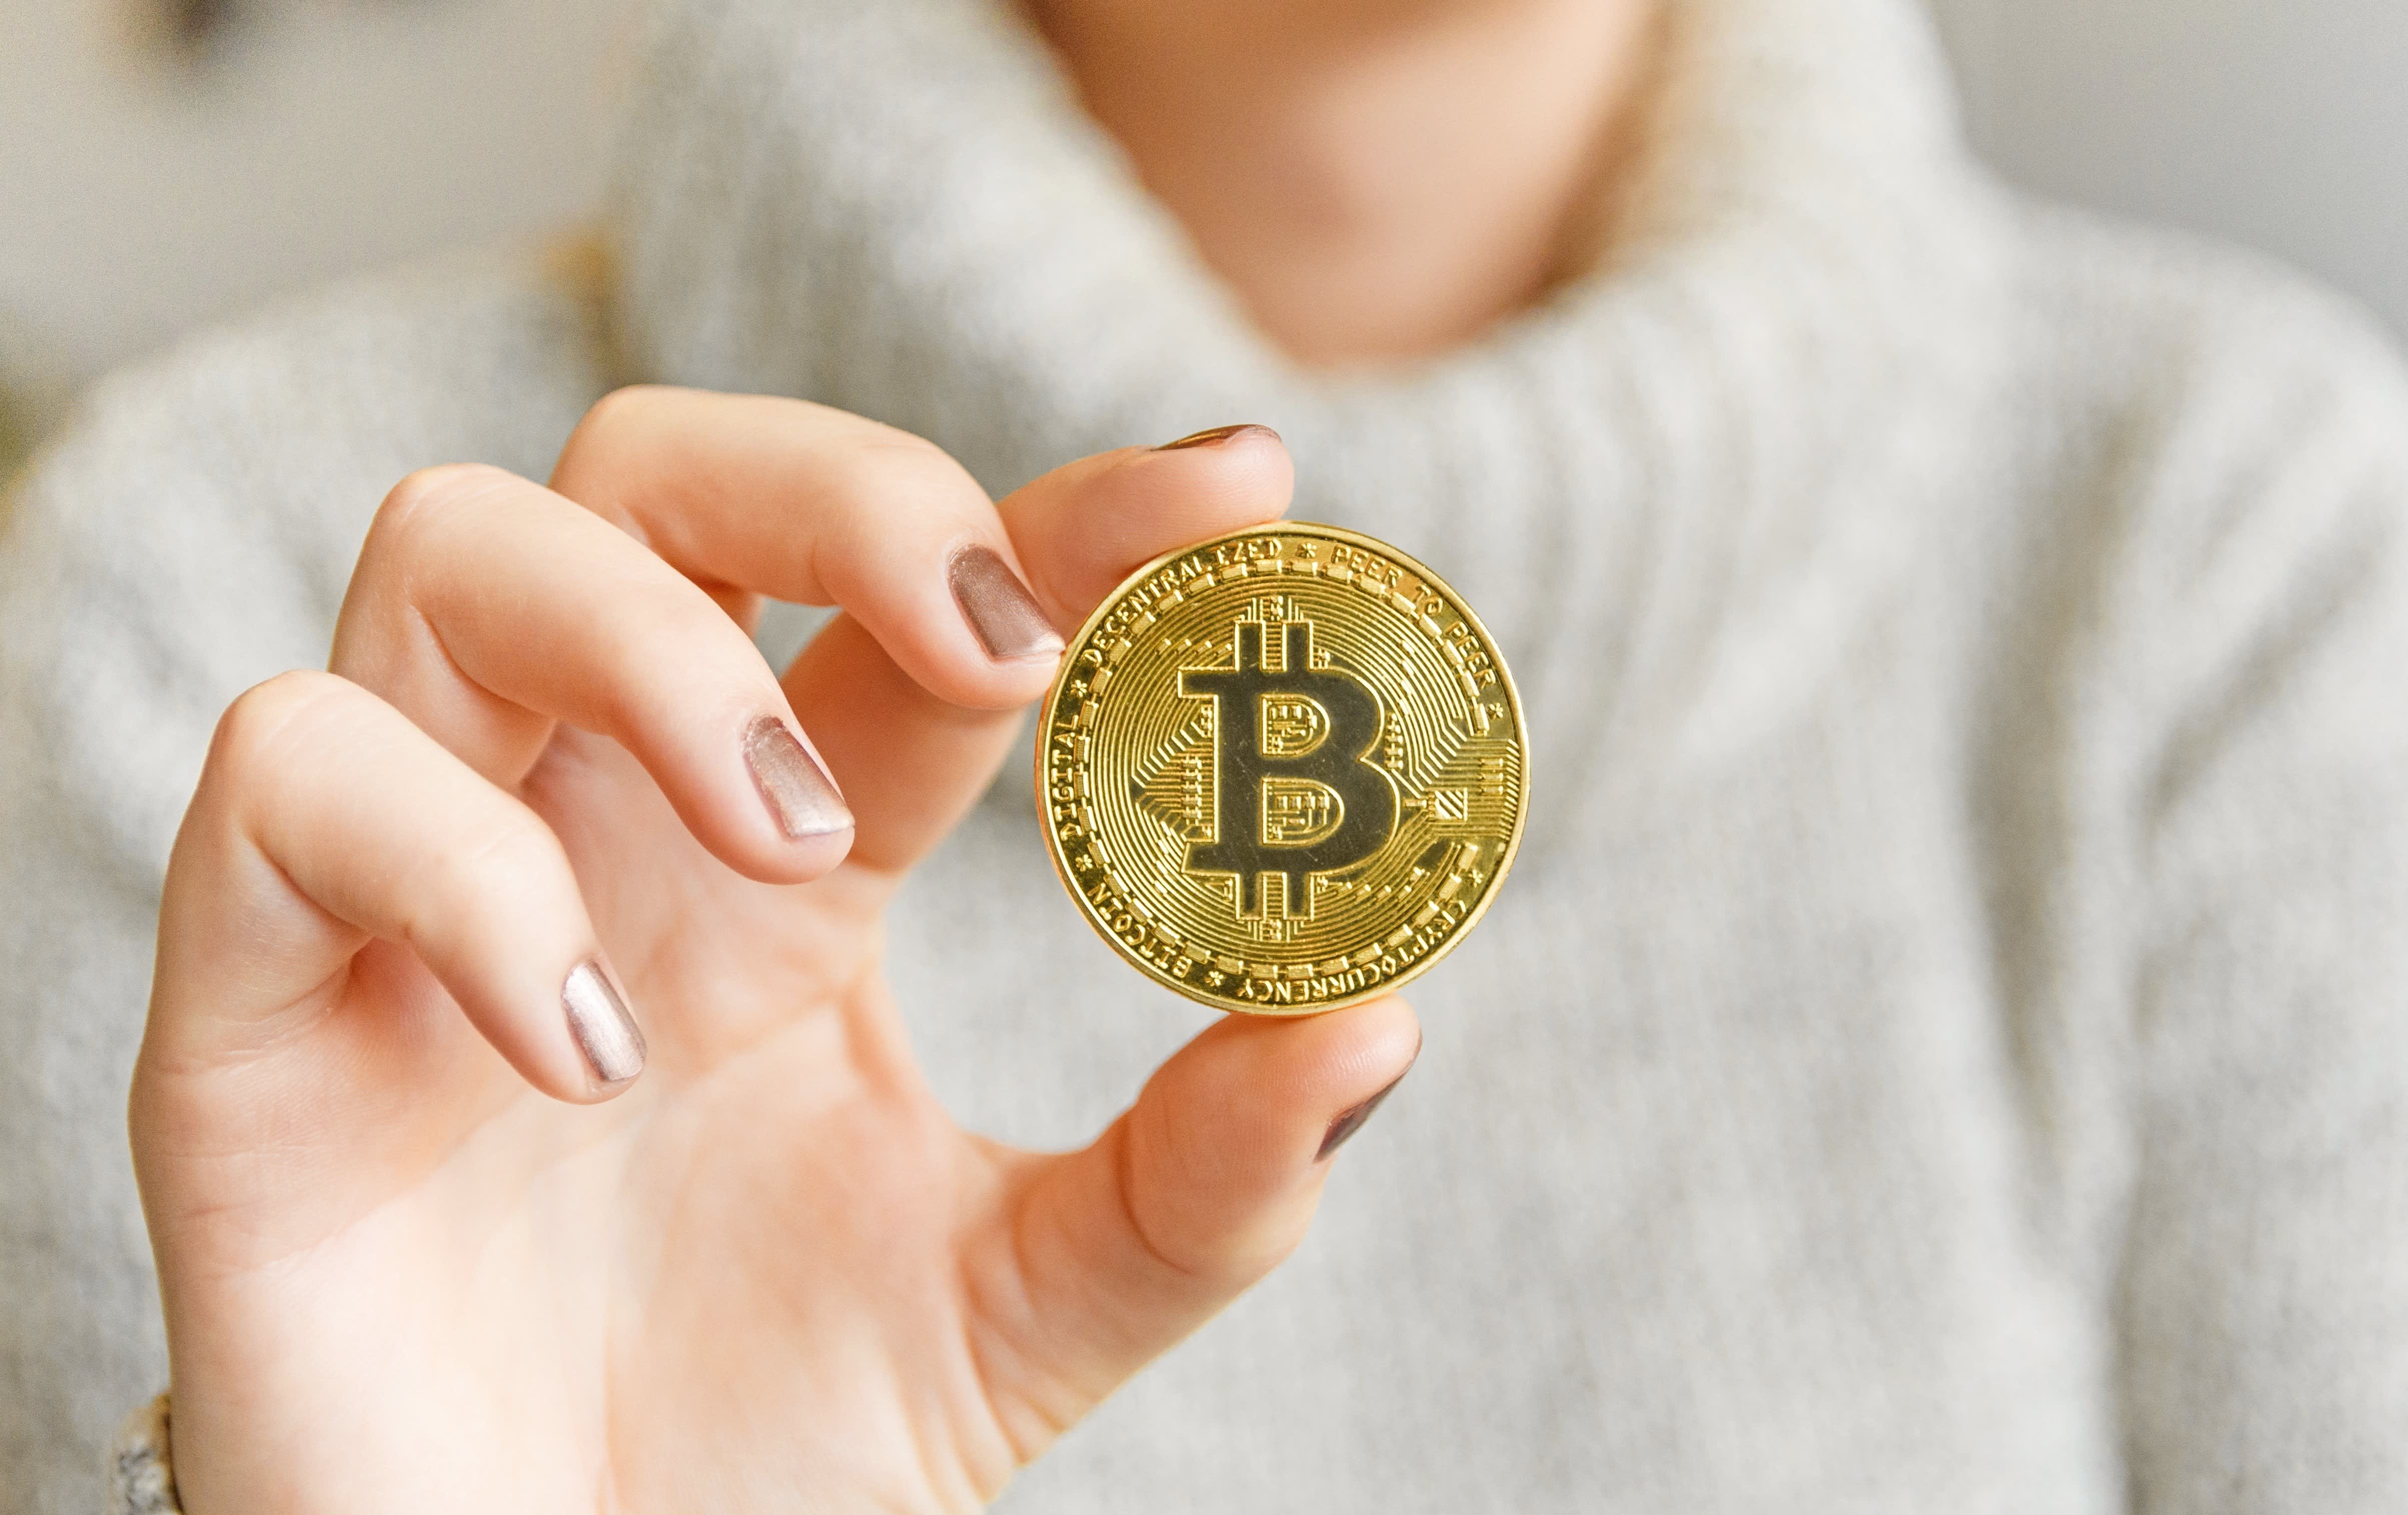 Investing in Bitcoin: Bitcoin’s pros and cons